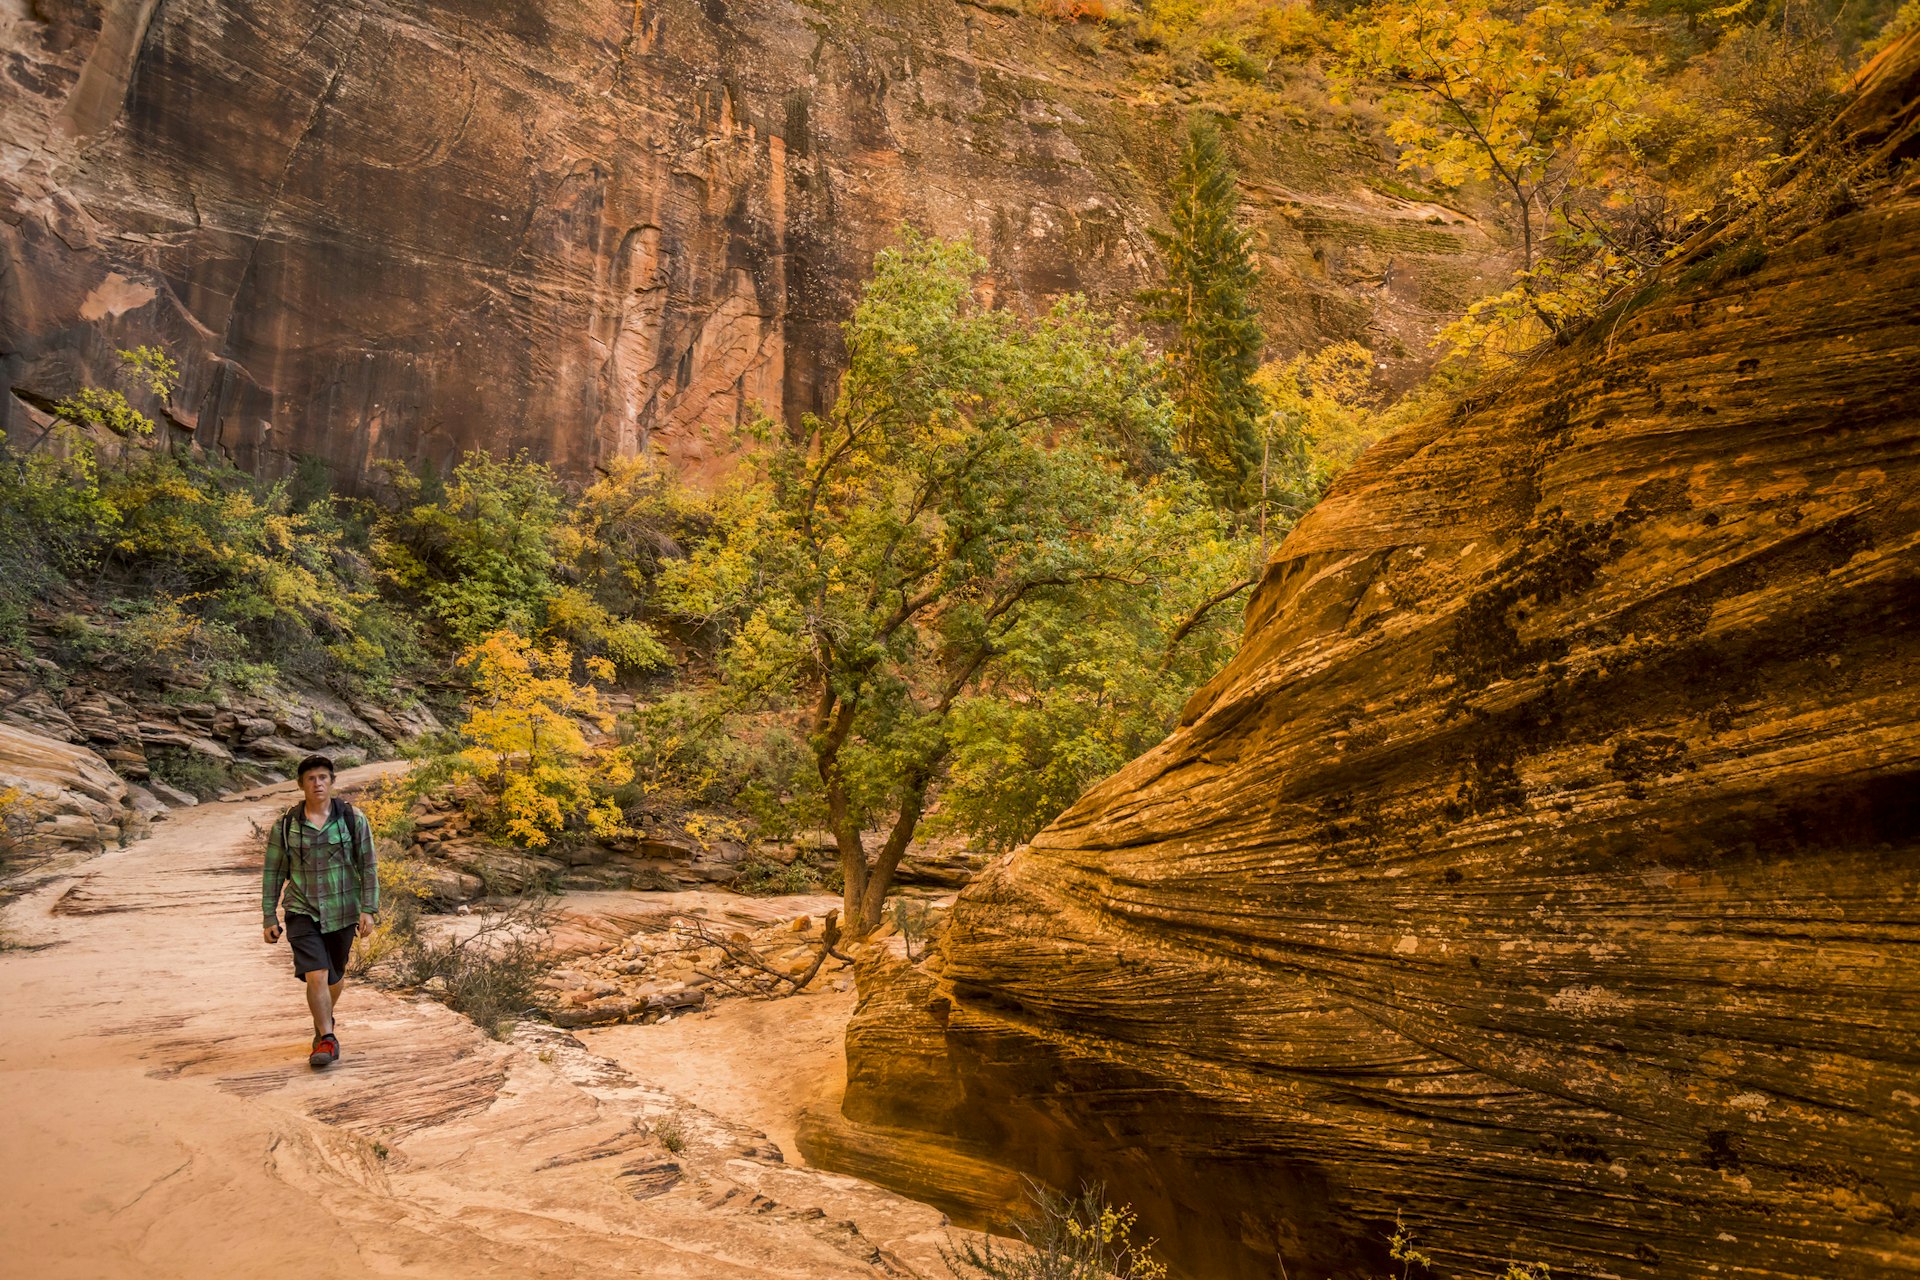 Male hiker on East Rim trail in Zion national park with desert cliffs and some trees changing colour